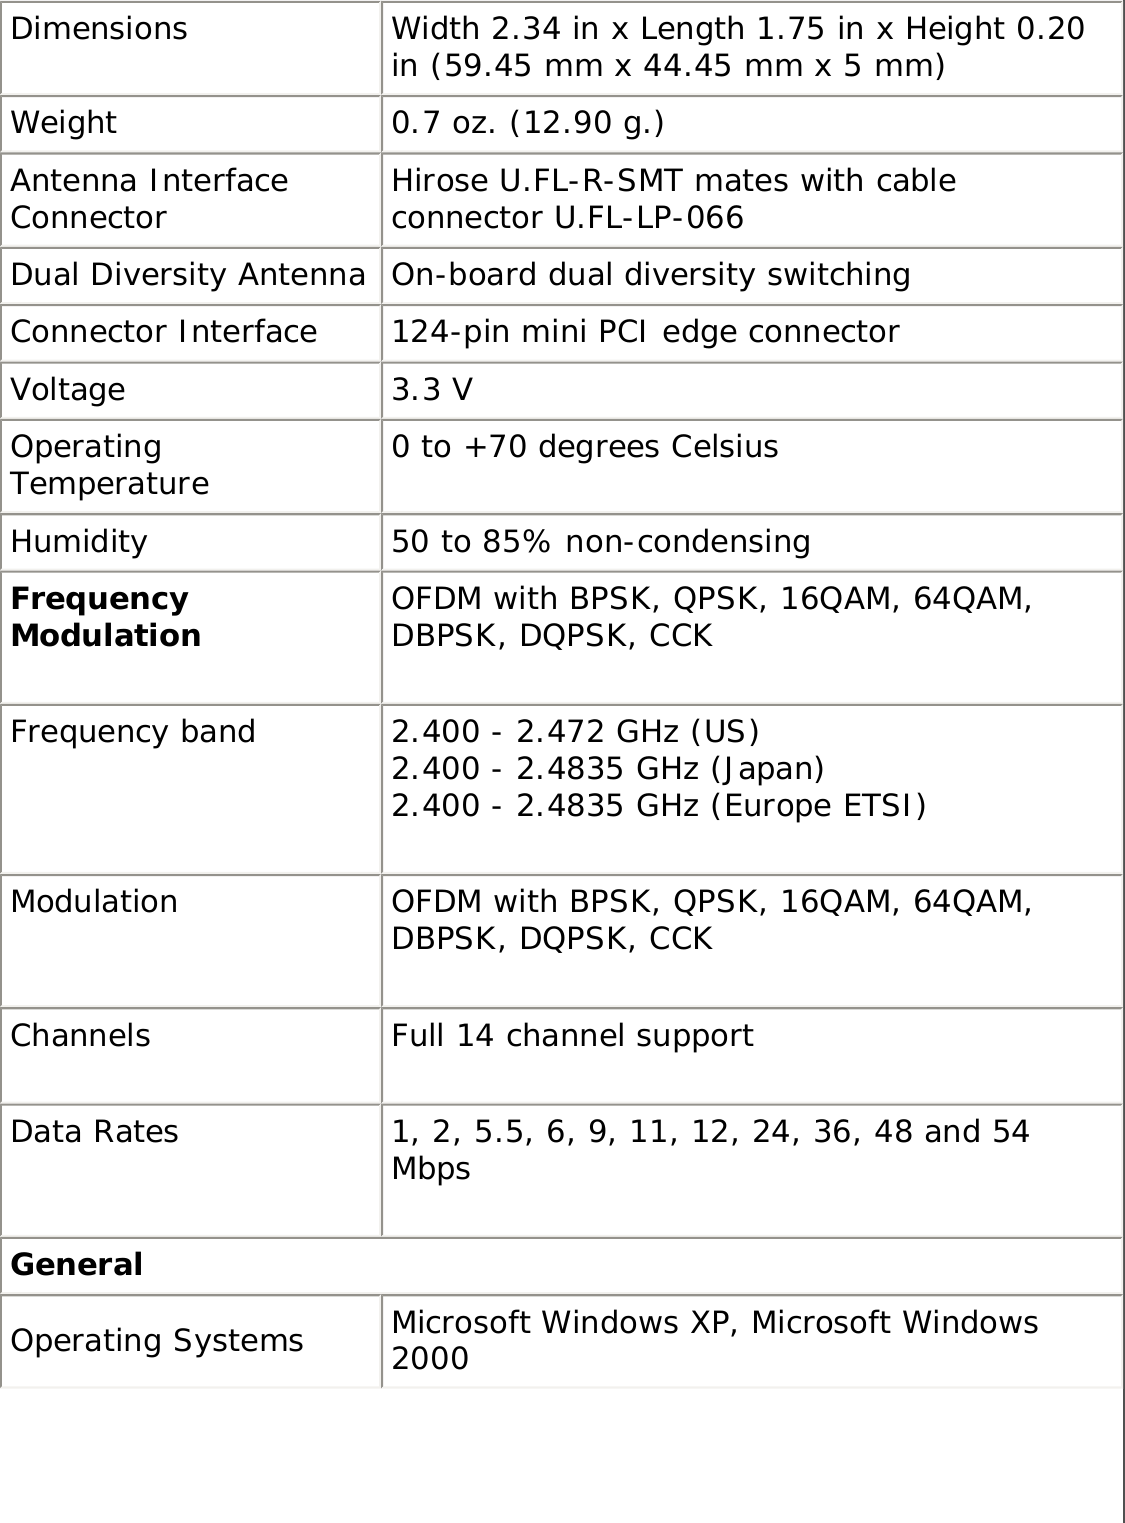 Dimensions Width 2.34 in x Length 1.75 in x Height 0.20 in (59.45 mm x 44.45 mm x 5 mm) Weight 0.7 oz. (12.90 g.) Antenna Interface Connector Hirose U.FL-R-SMT mates with cable connector U.FL-LP-066 Dual Diversity Antenna On-board dual diversity switching Connector Interface 124-pin mini PCI edge connector Voltage 3.3 VOperating Temperature 0 to +70 degrees Celsius Humidity 50 to 85% non-condensingFrequency Modulation OFDM with BPSK, QPSK, 16QAM, 64QAM, DBPSK, DQPSK, CCKFrequency band 2.400 - 2.472 GHz (US)2.400 - 2.4835 GHz (Japan)2.400 - 2.4835 GHz (Europe ETSI)Modulation OFDM with BPSK, QPSK, 16QAM, 64QAM, DBPSK, DQPSK, CCKChannels Full 14 channel supportData Rates 1, 2, 5.5, 6, 9, 11, 12, 24, 36, 48 and 54 MbpsGeneralOperating Systems Microsoft Windows XP, Microsoft Windows 2000